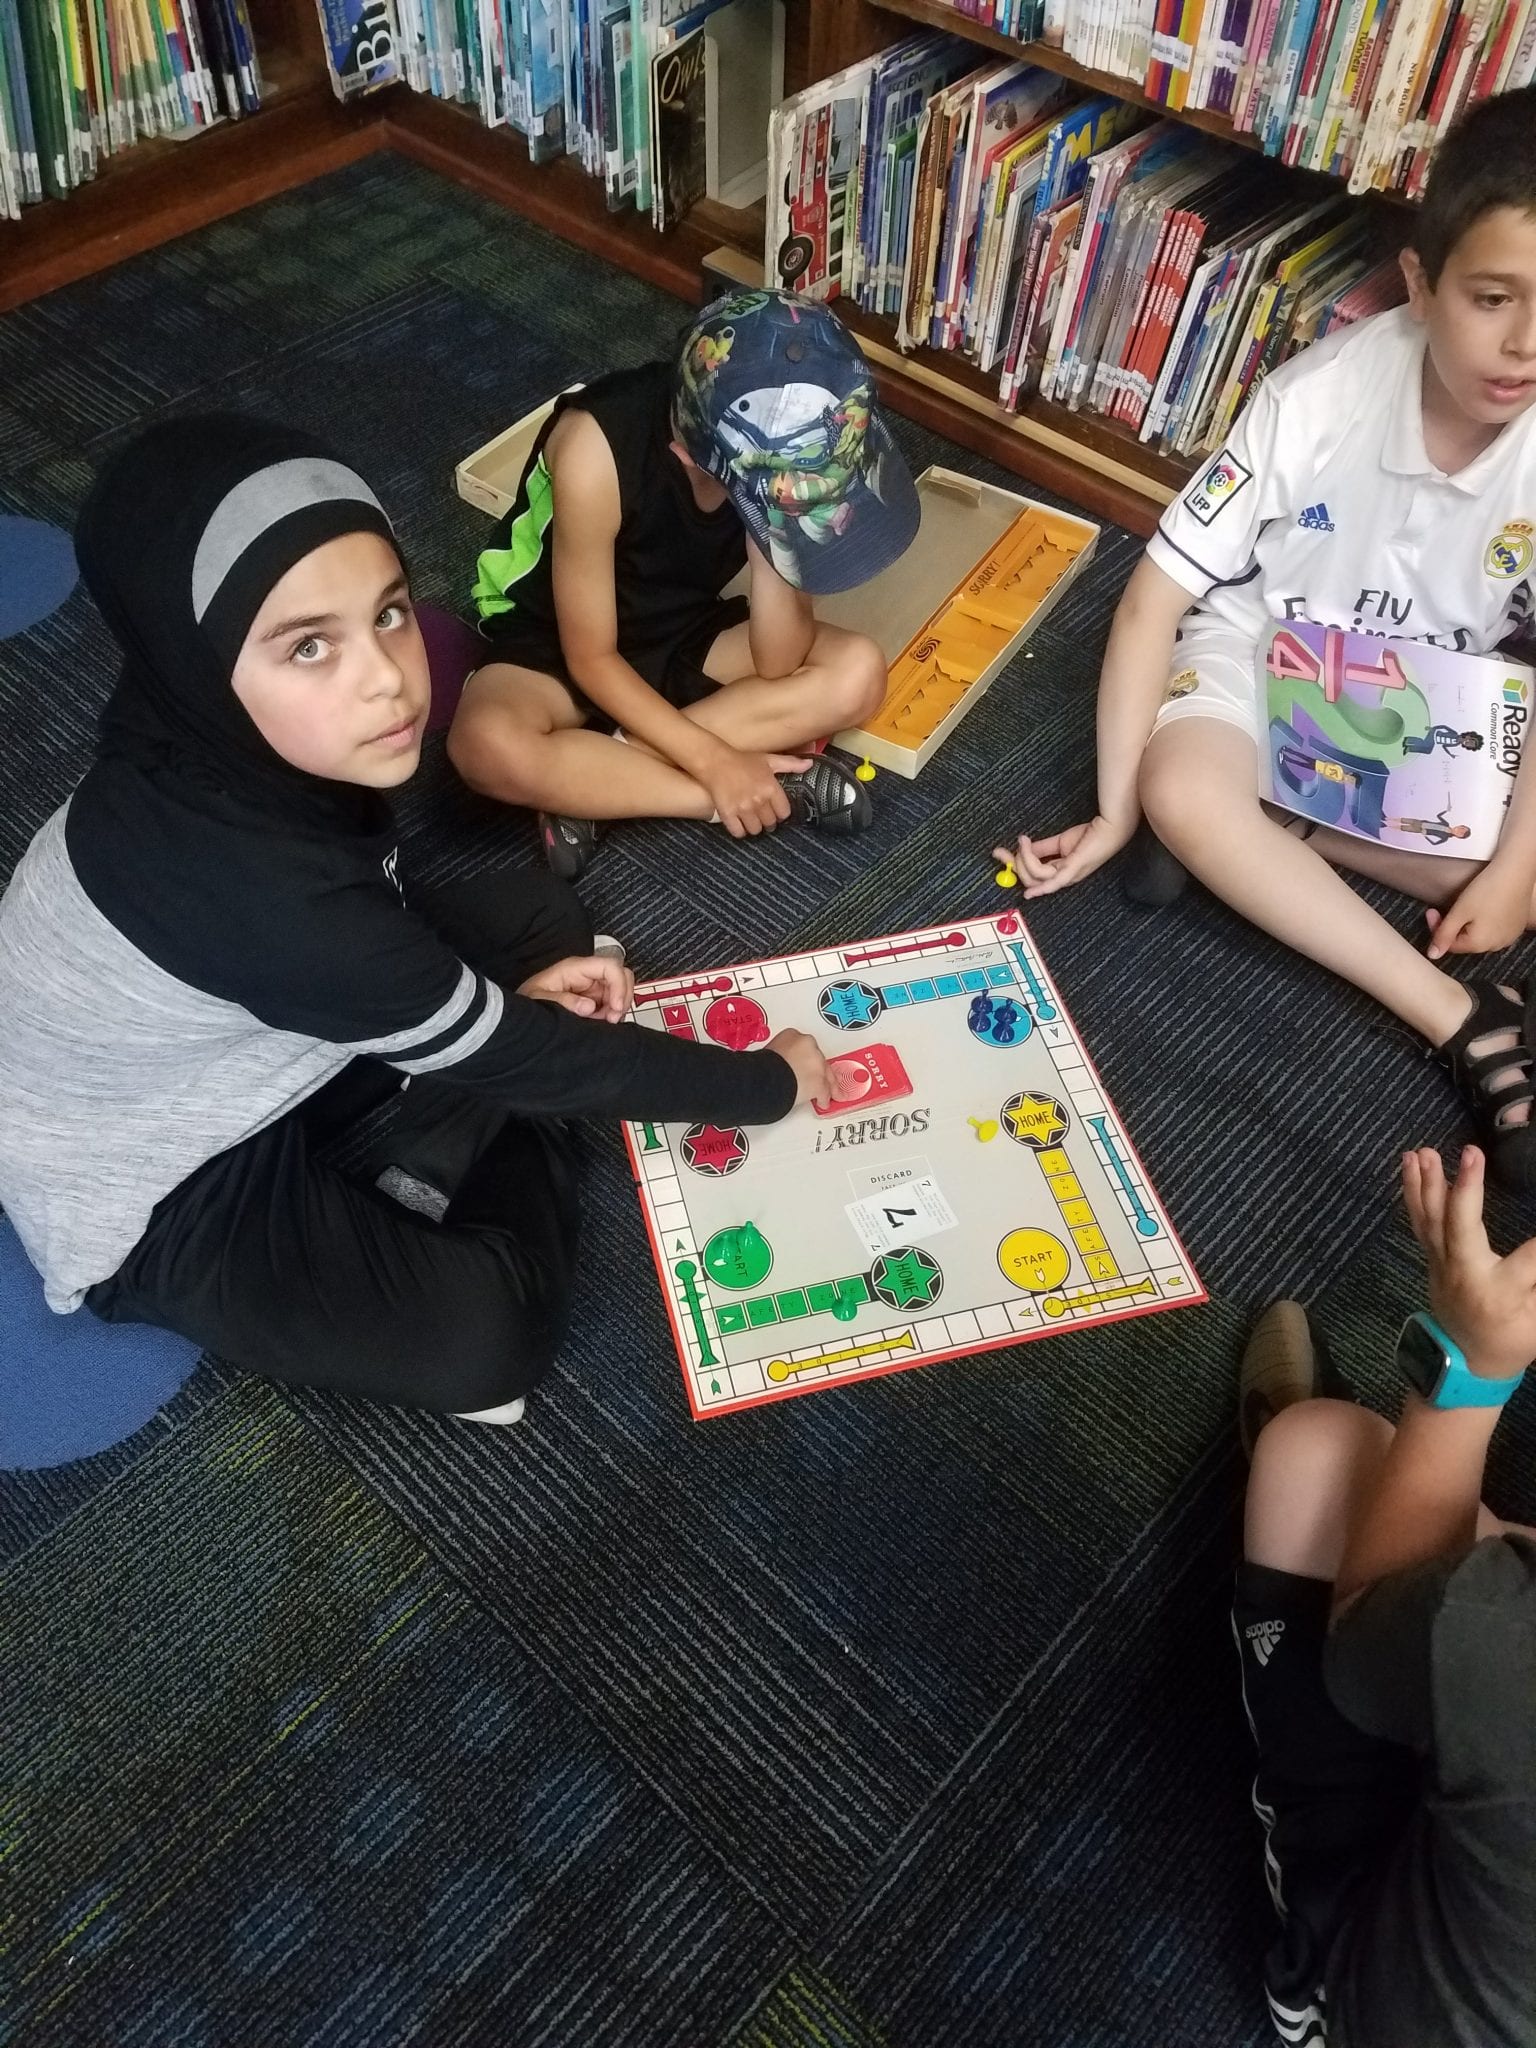 Students playing board games before leaving for the day